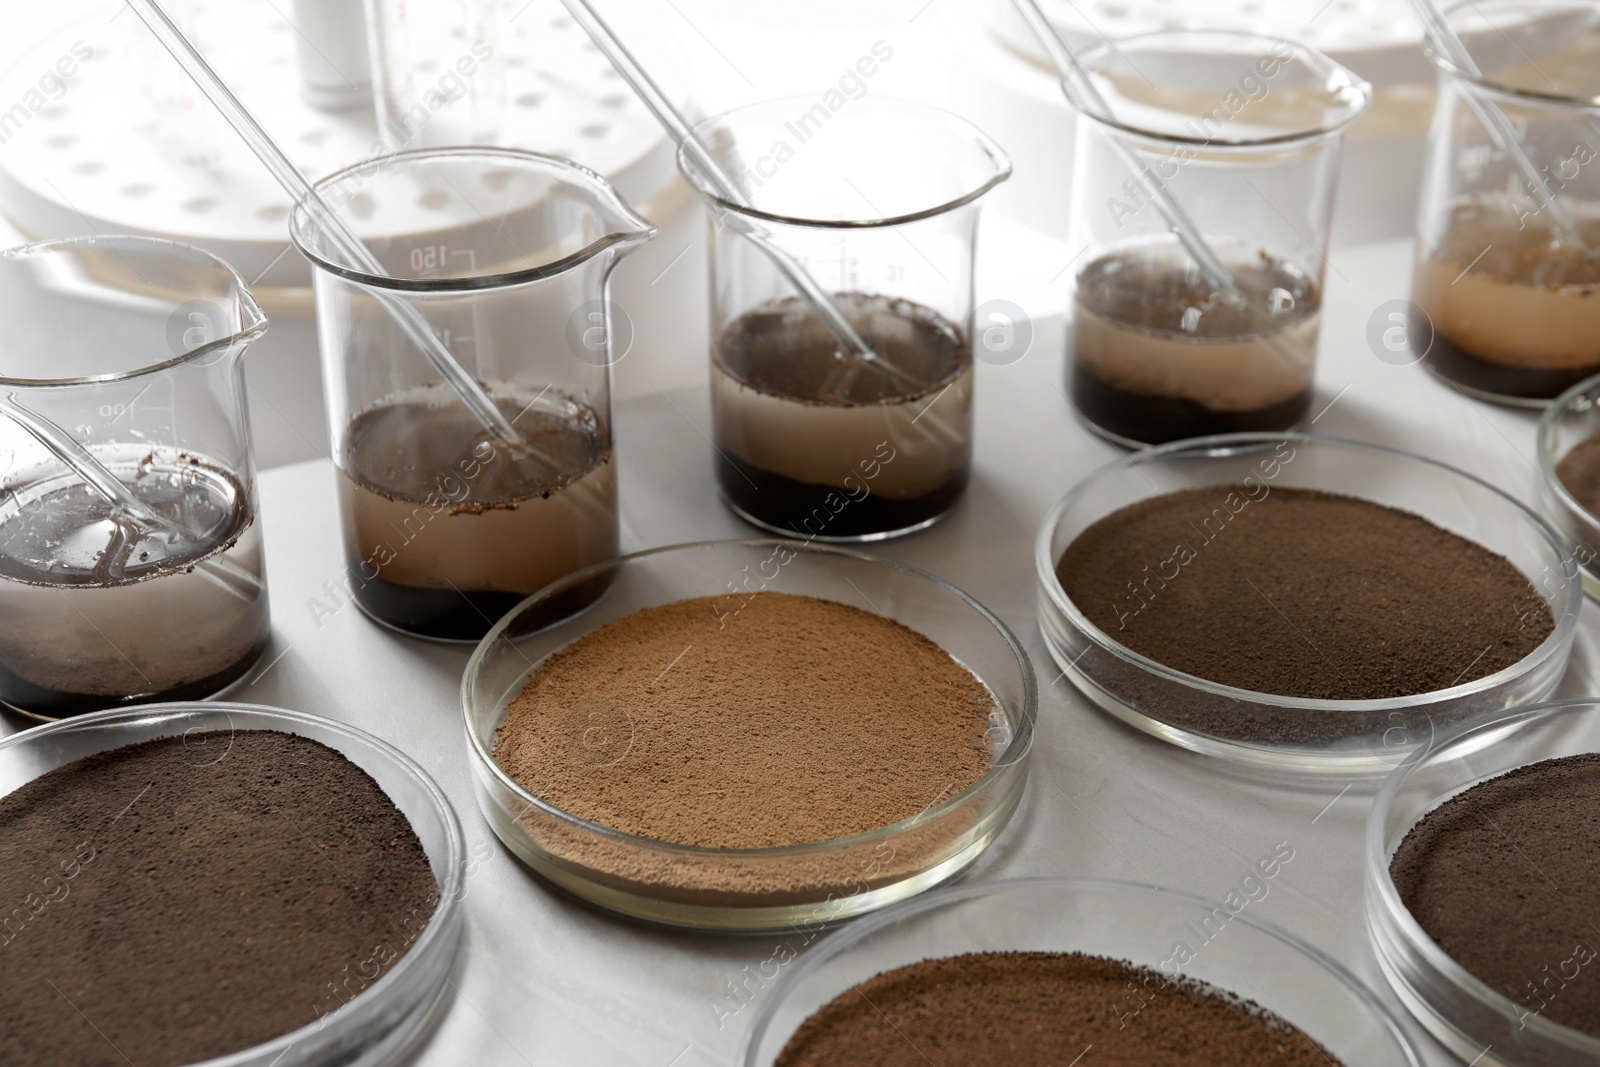 Photo of Glassware with soil samples and extracts on light table. Laboratory research